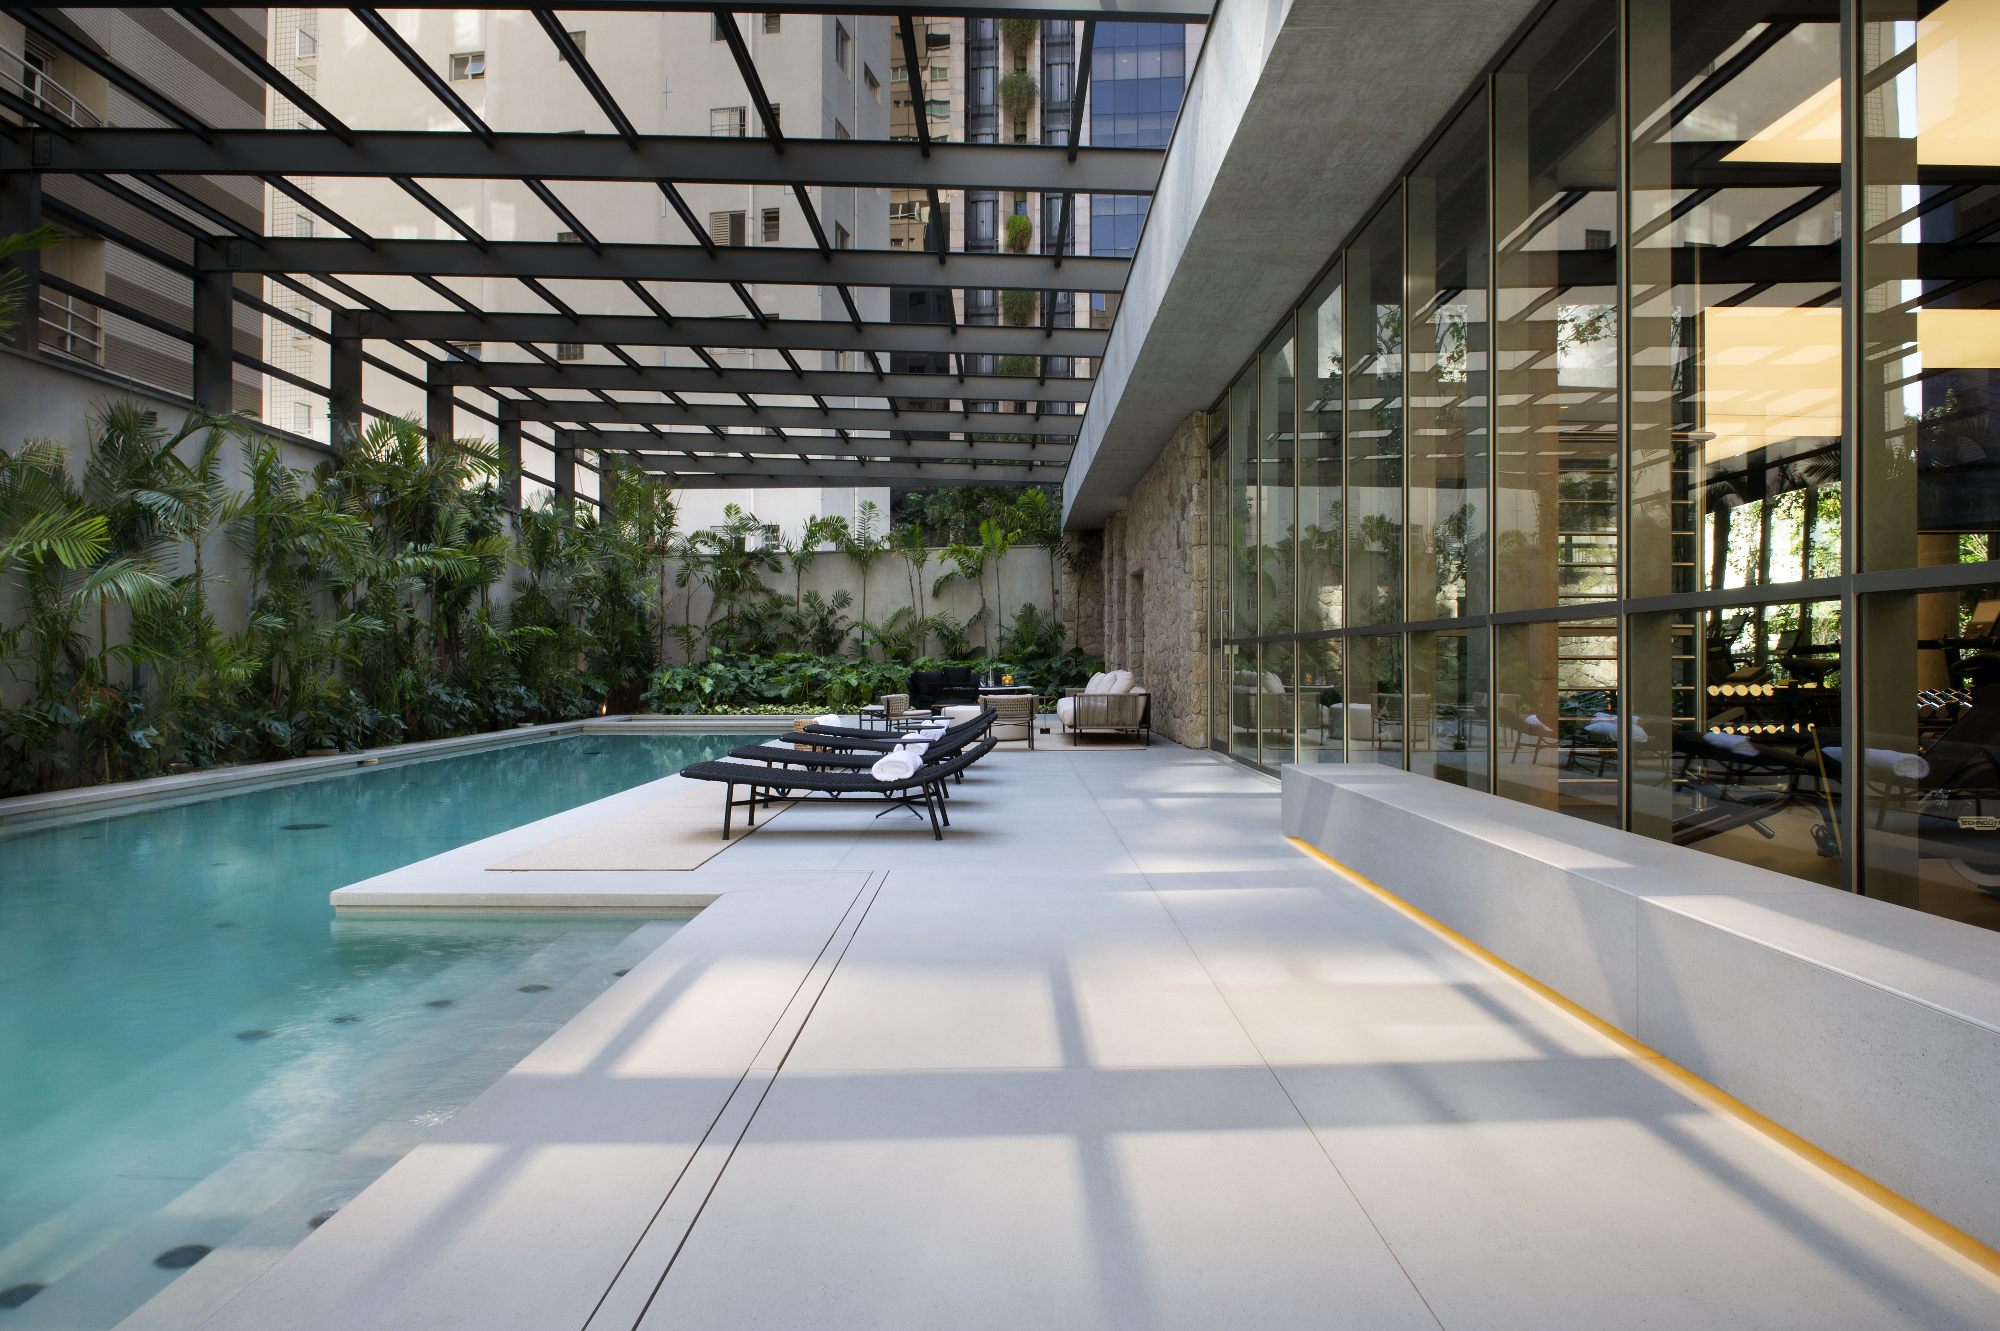 Image of DK STRATO @marcelo magnani.oficial @casabrasileiraitaim @jaderalmeida 2393 in Dekton Helena brings beauty and sustainability to a relaxed luxury flat in Singapore’s most exclusive area - Cosentino